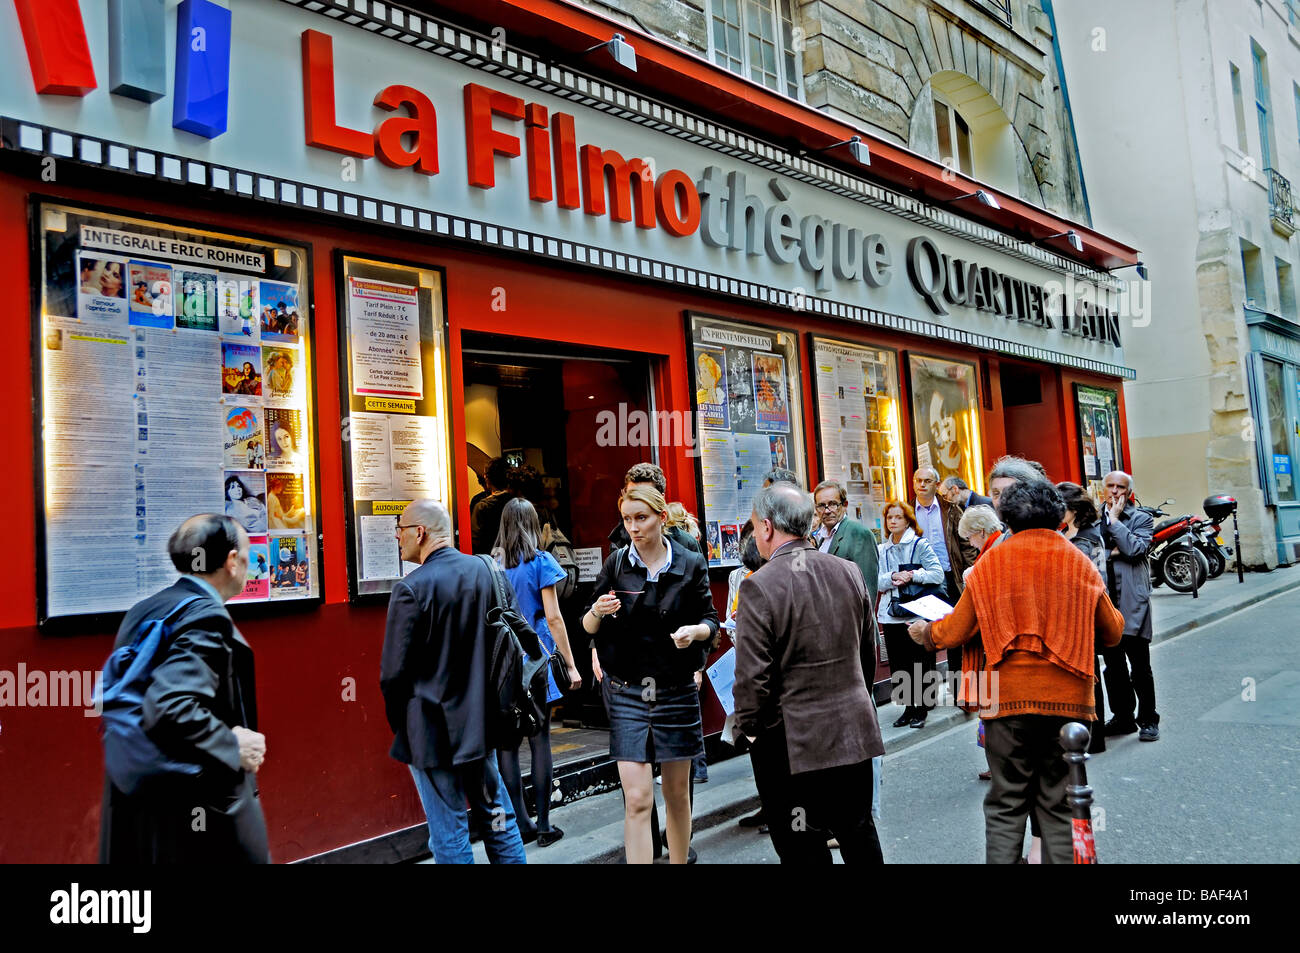 Paris France, Street Scene, Outside, Independent French Cinema Theatre, Latin Quarter, 'La Filmotheque' Front Movie Theater Marquee, EXTERIOR, waiting Stock Photo